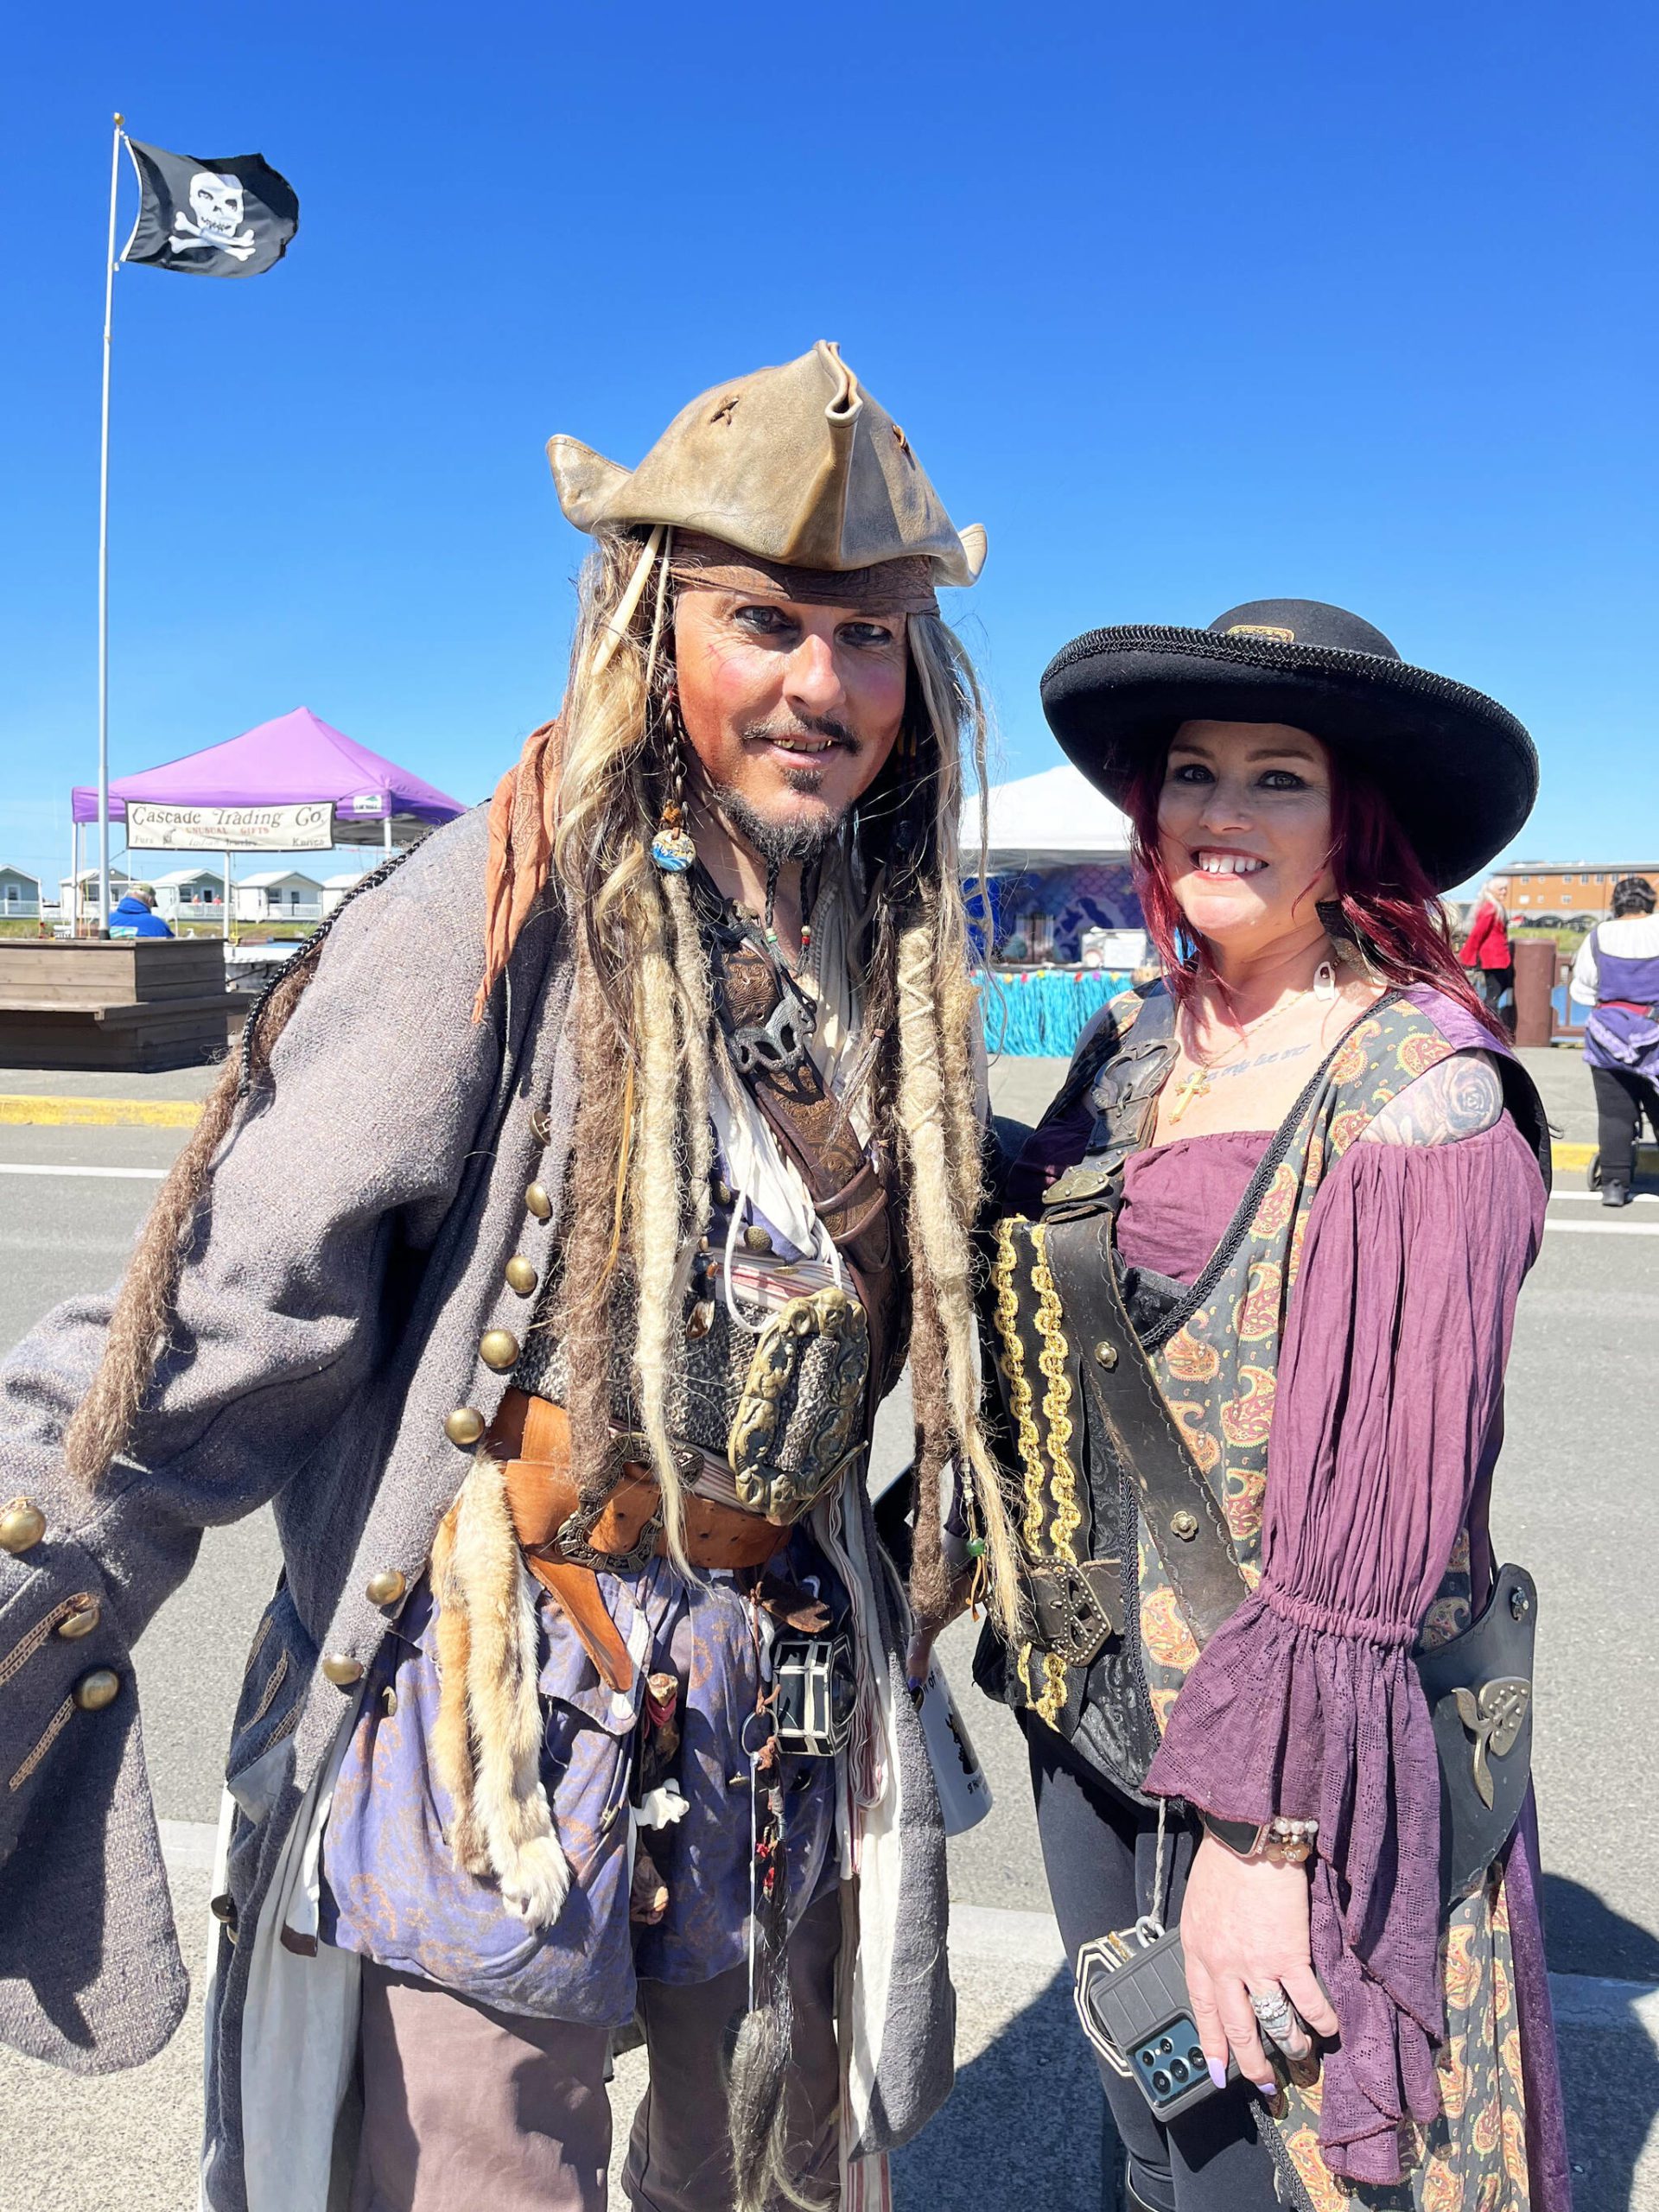 (Matthew N. Wells | The Daily World) “Capt. Jack Sparrow,” and “Angelica,” the daughter of “Blackbeard,” played by Mike and Christine Vassar, were happy to oblige tourists, and The Daily World with an explanation of their dress, act, and why they love coming to Rusty Scupper’s Pirate Daze. The duo has come for about the last decade, and doesn’t plan on ending their tradition of driving from their home in St. Helens, Ore.